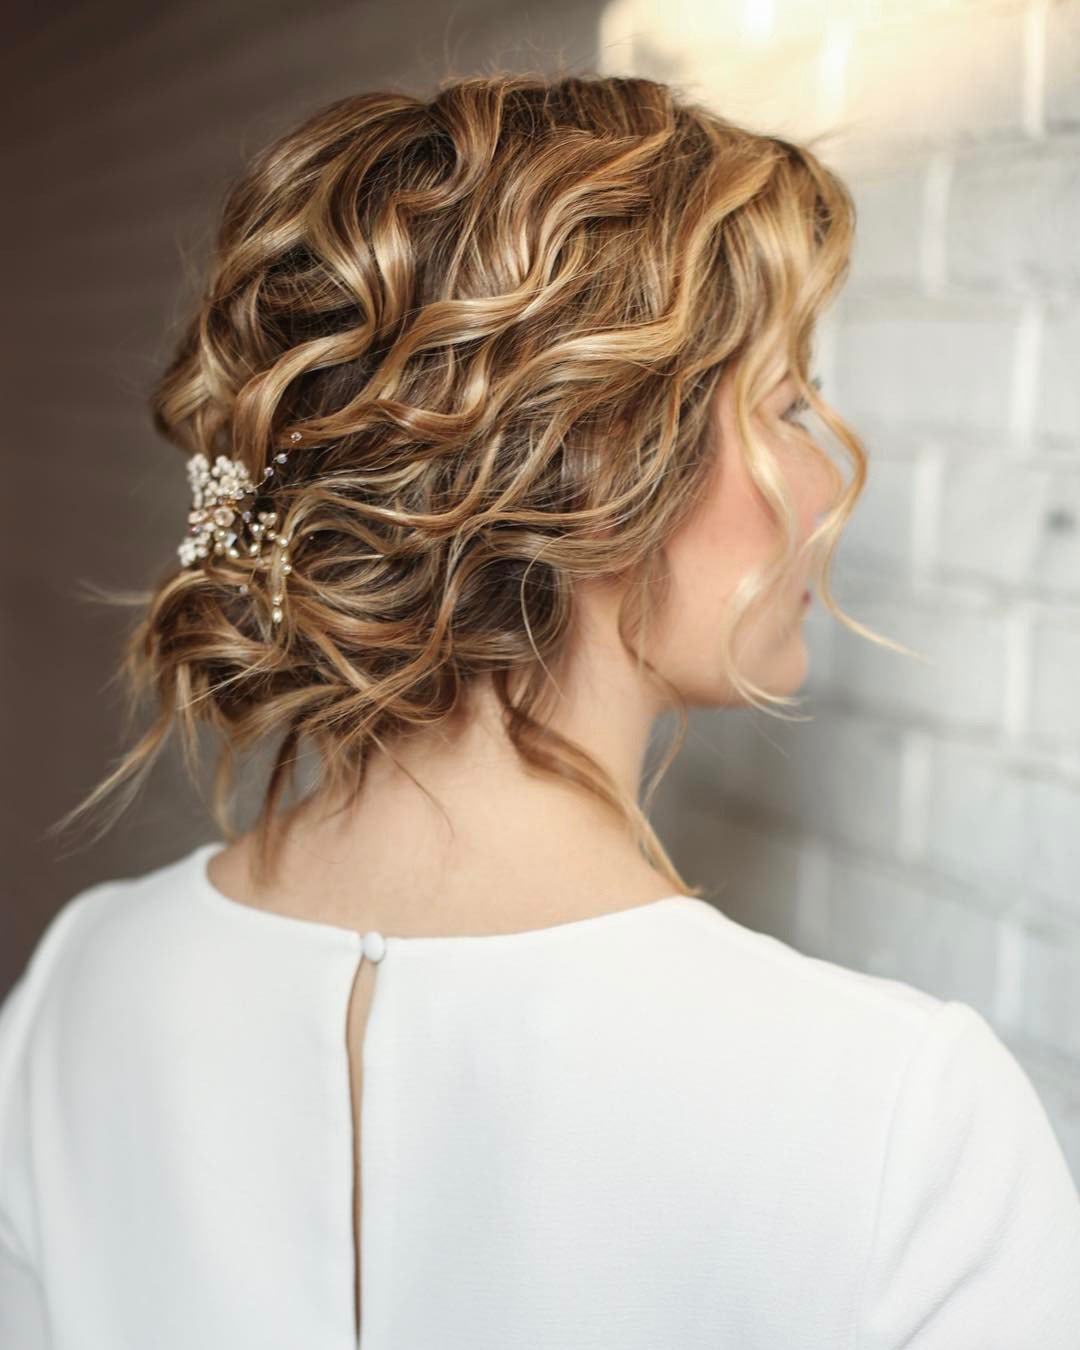 wedding hairstyles for short hair textured curly low updo kristinagasperasmua